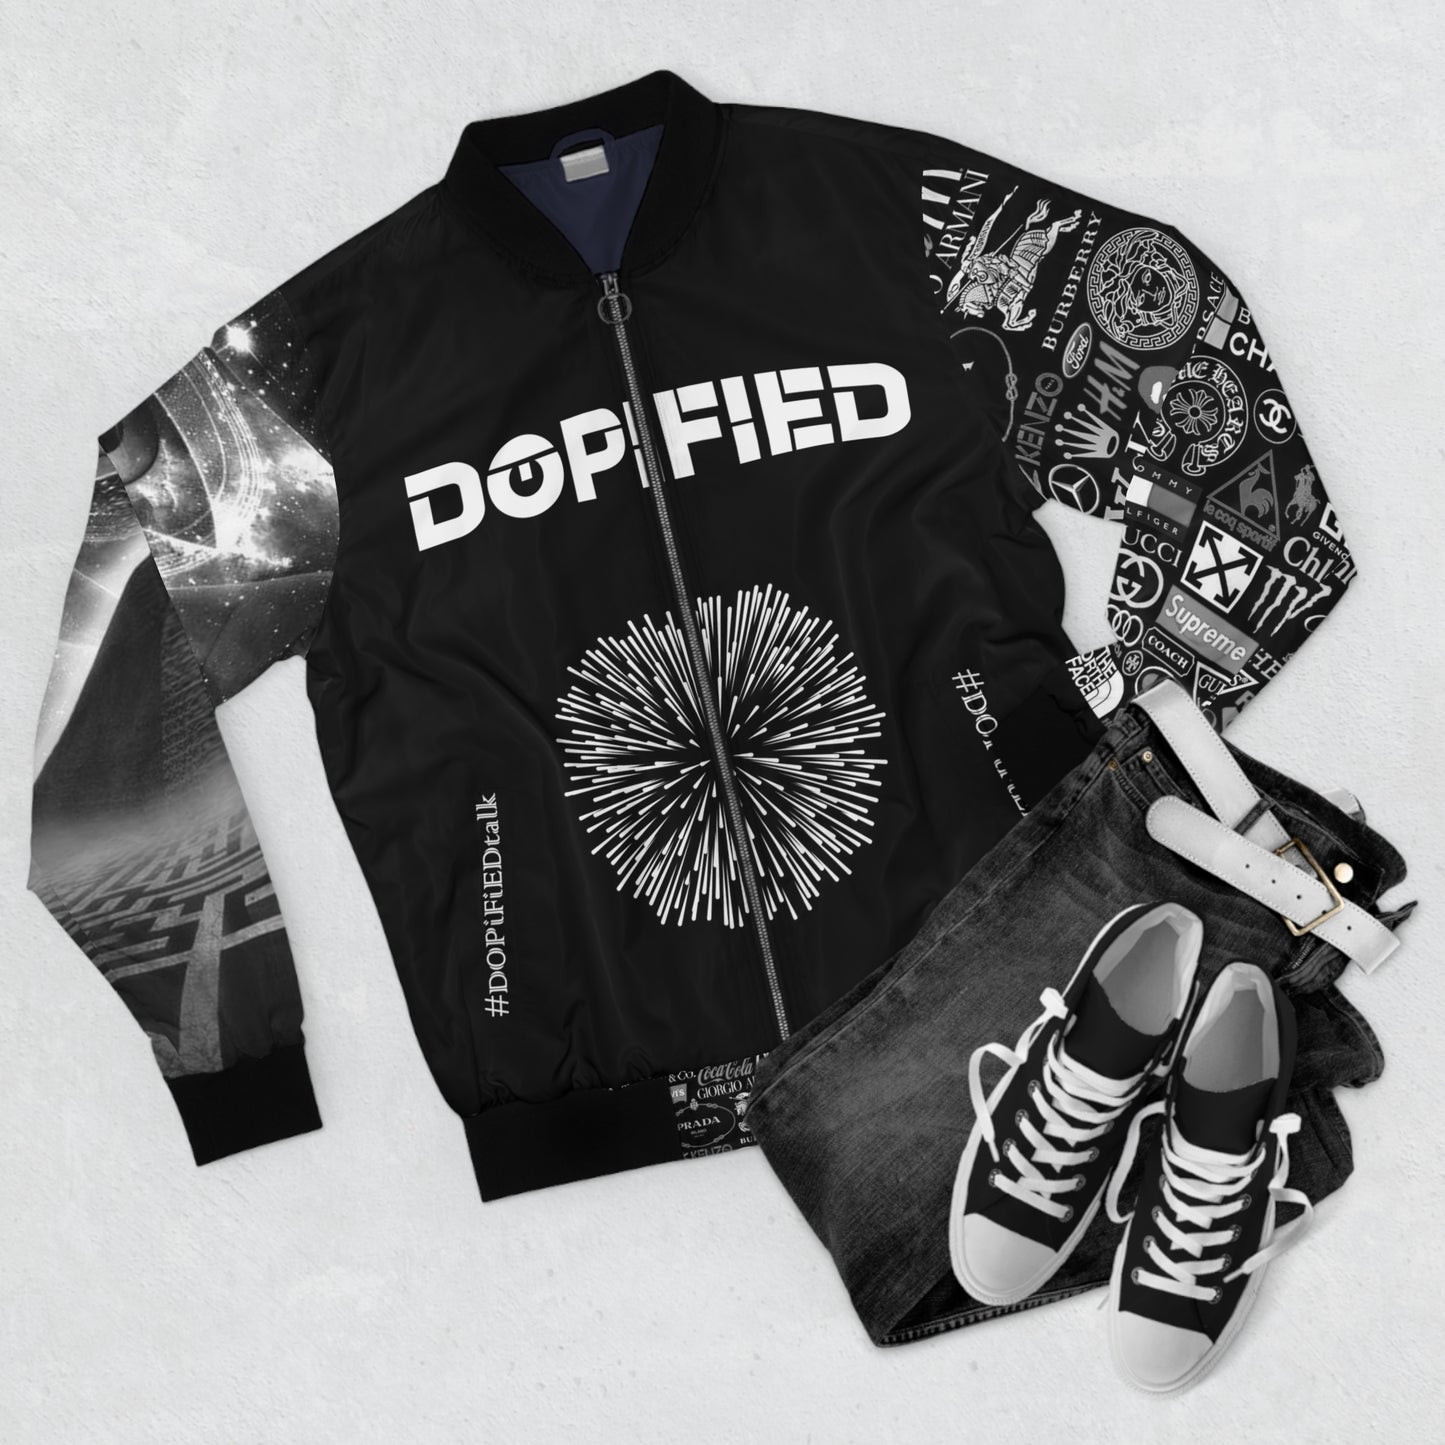 DOPiFiED CEO Limited Edition jacket